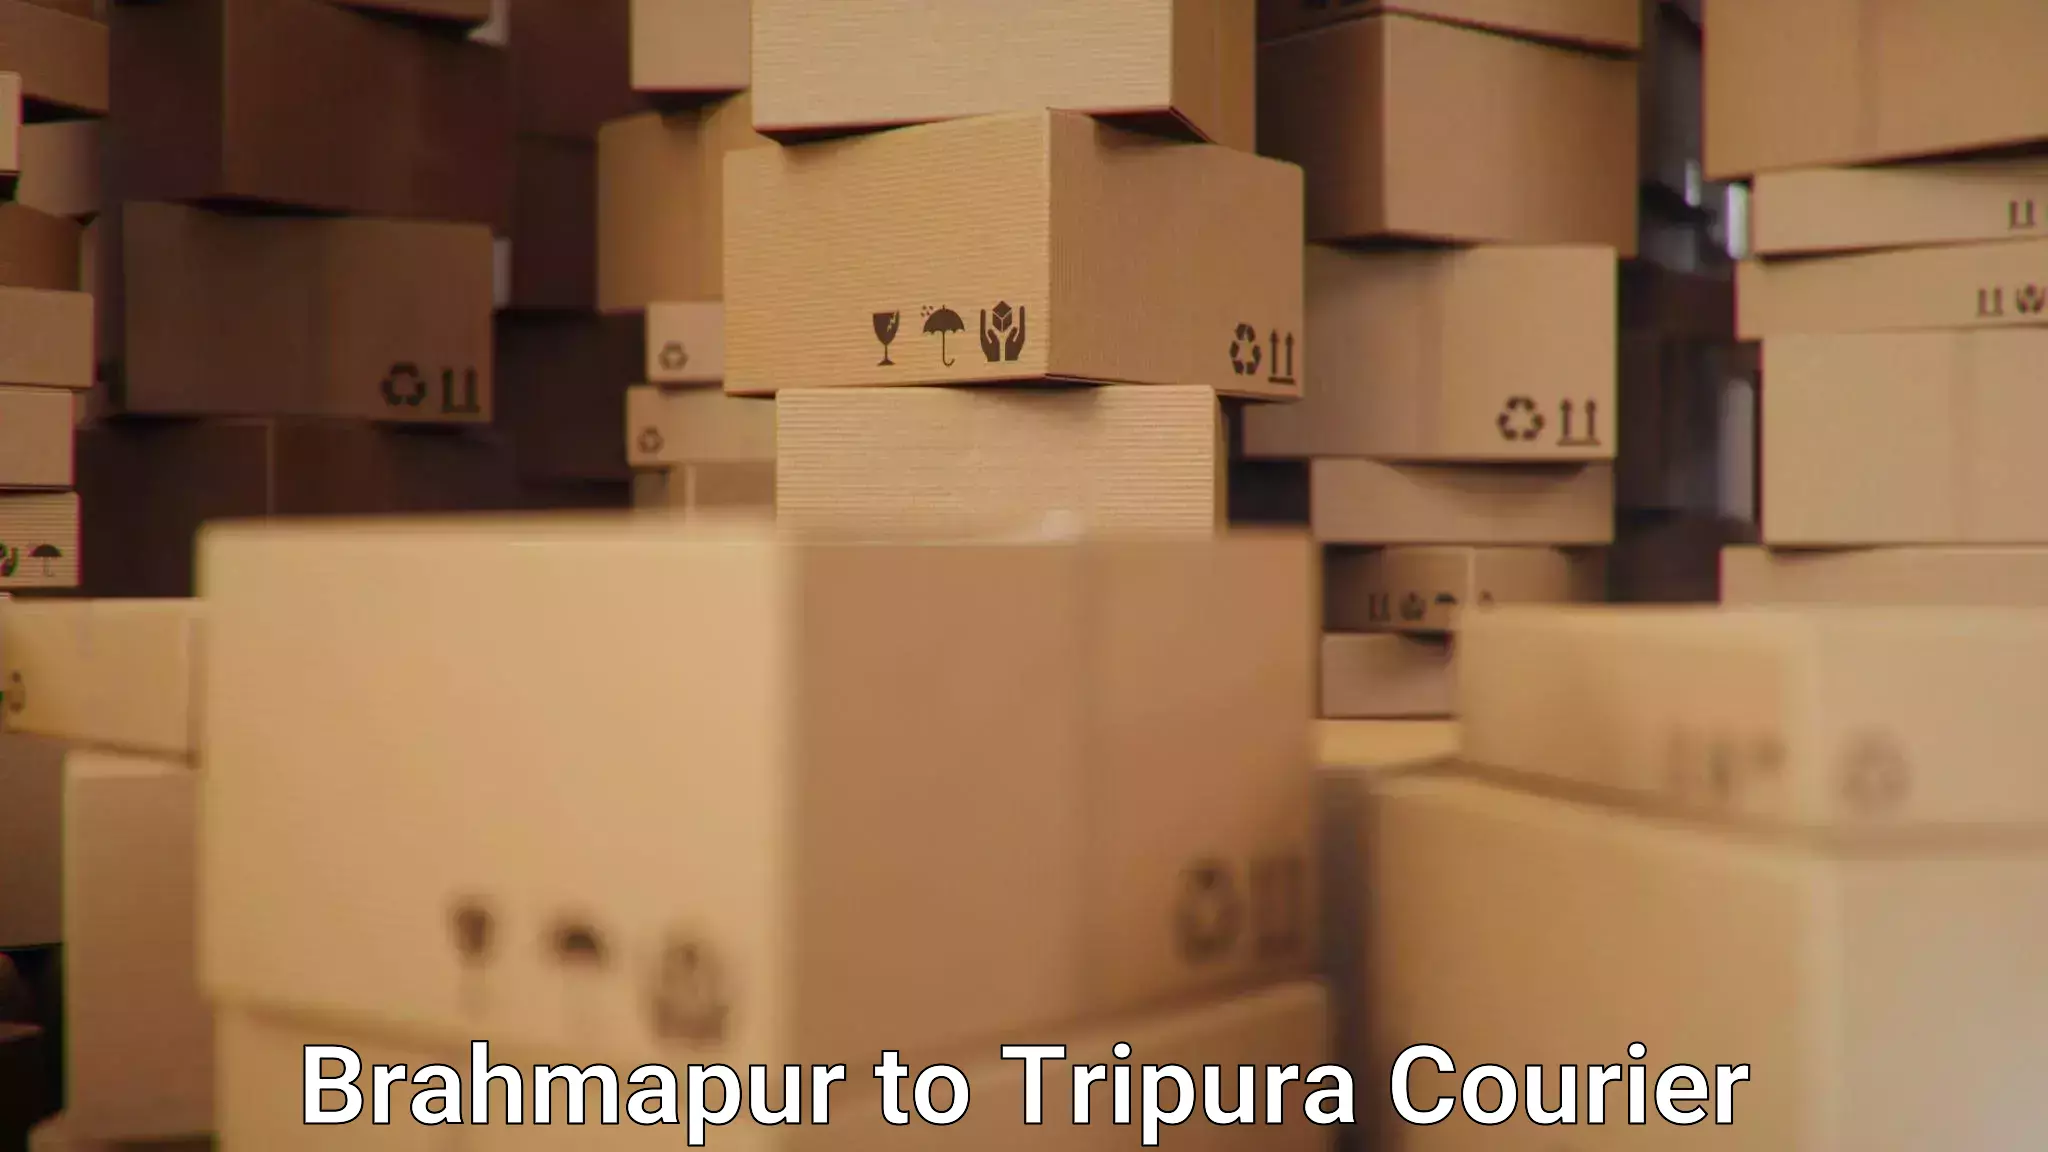 State-of-the-art courier technology Brahmapur to Dhalai